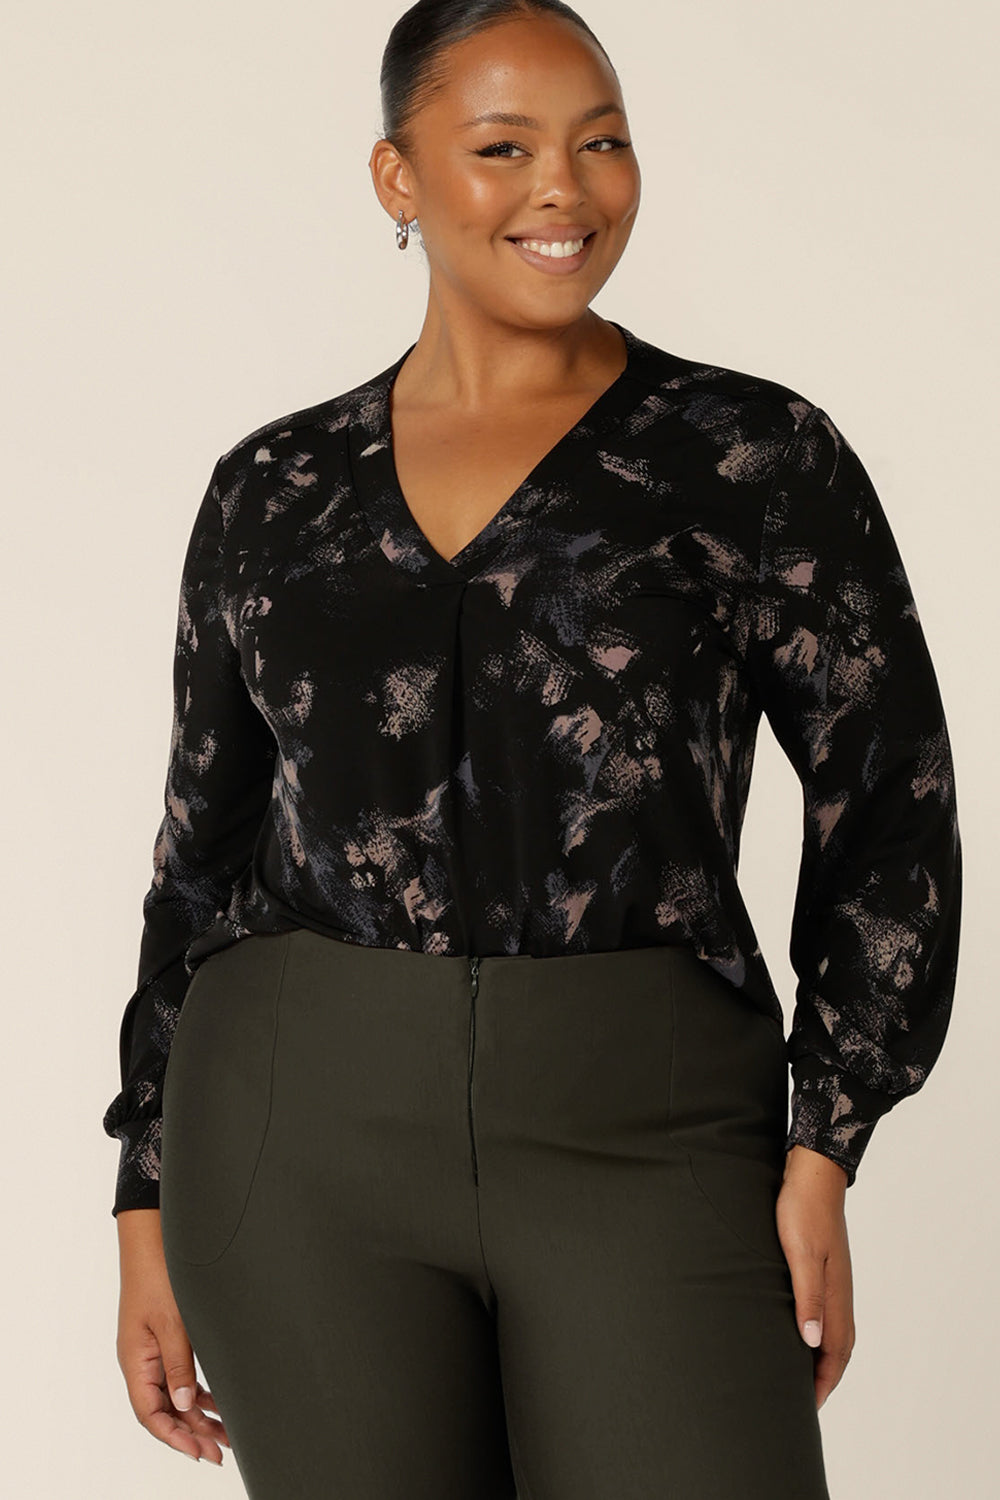 A plus size, size 18 woman wears a long bishop sleeve, V-neck top in printed black jersey. Made in Australia by Australian and New Zealand women's clothing company, L&F, this women's top is good for workwear and casual wear. 